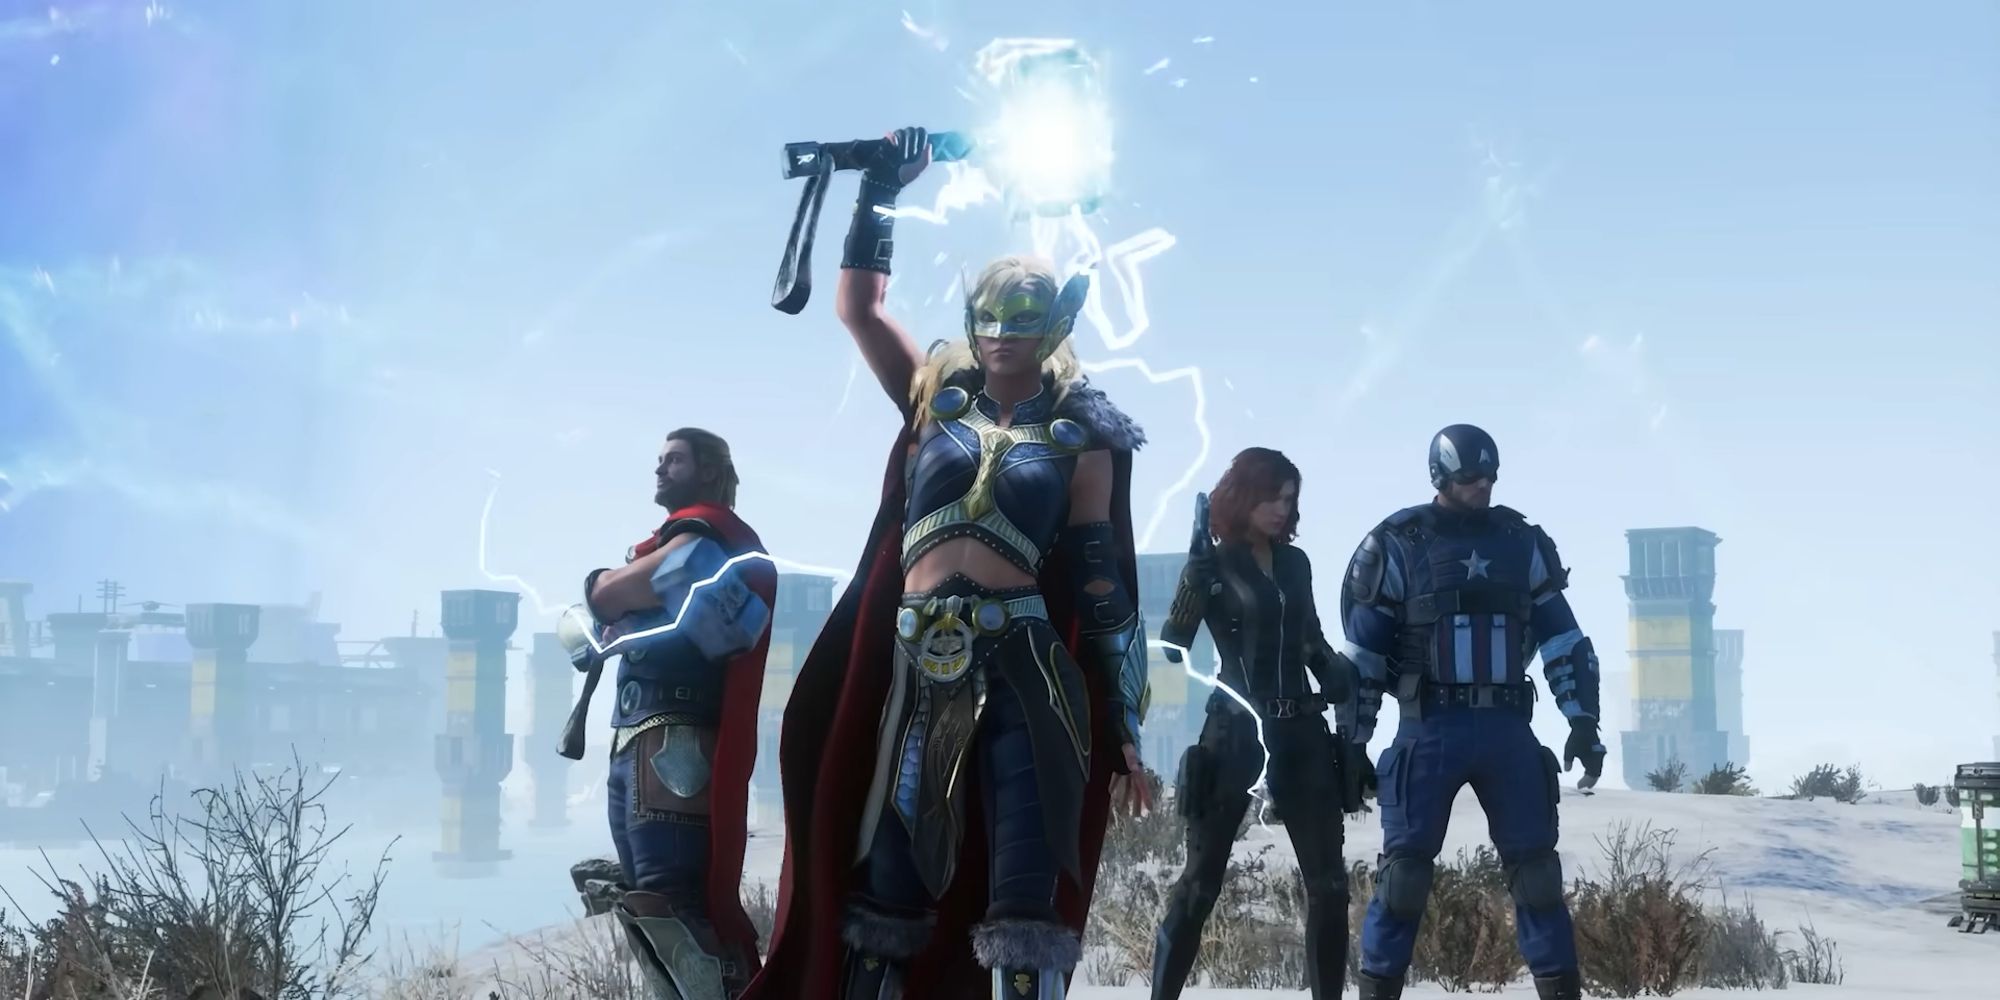 Thor Odinson Jane Foster The Mighty Thor Black Widow and Captain America as a team in Marvels Avengers